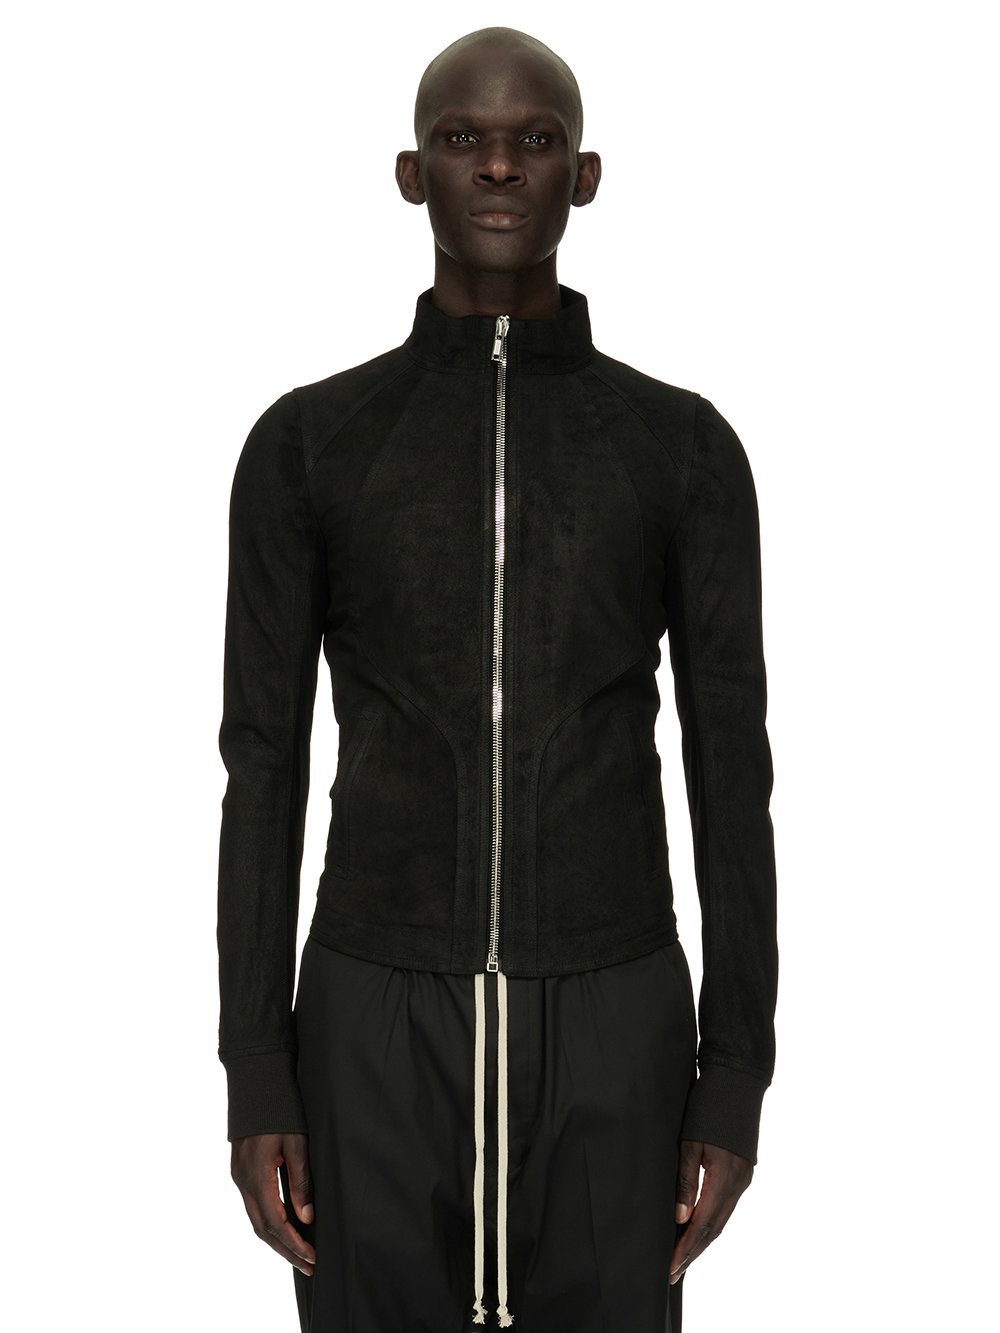 RICK OWENS FOREVER INTARSIA HIGH NECK JACKET IN BLACK BLISTER LAMB LEATHER